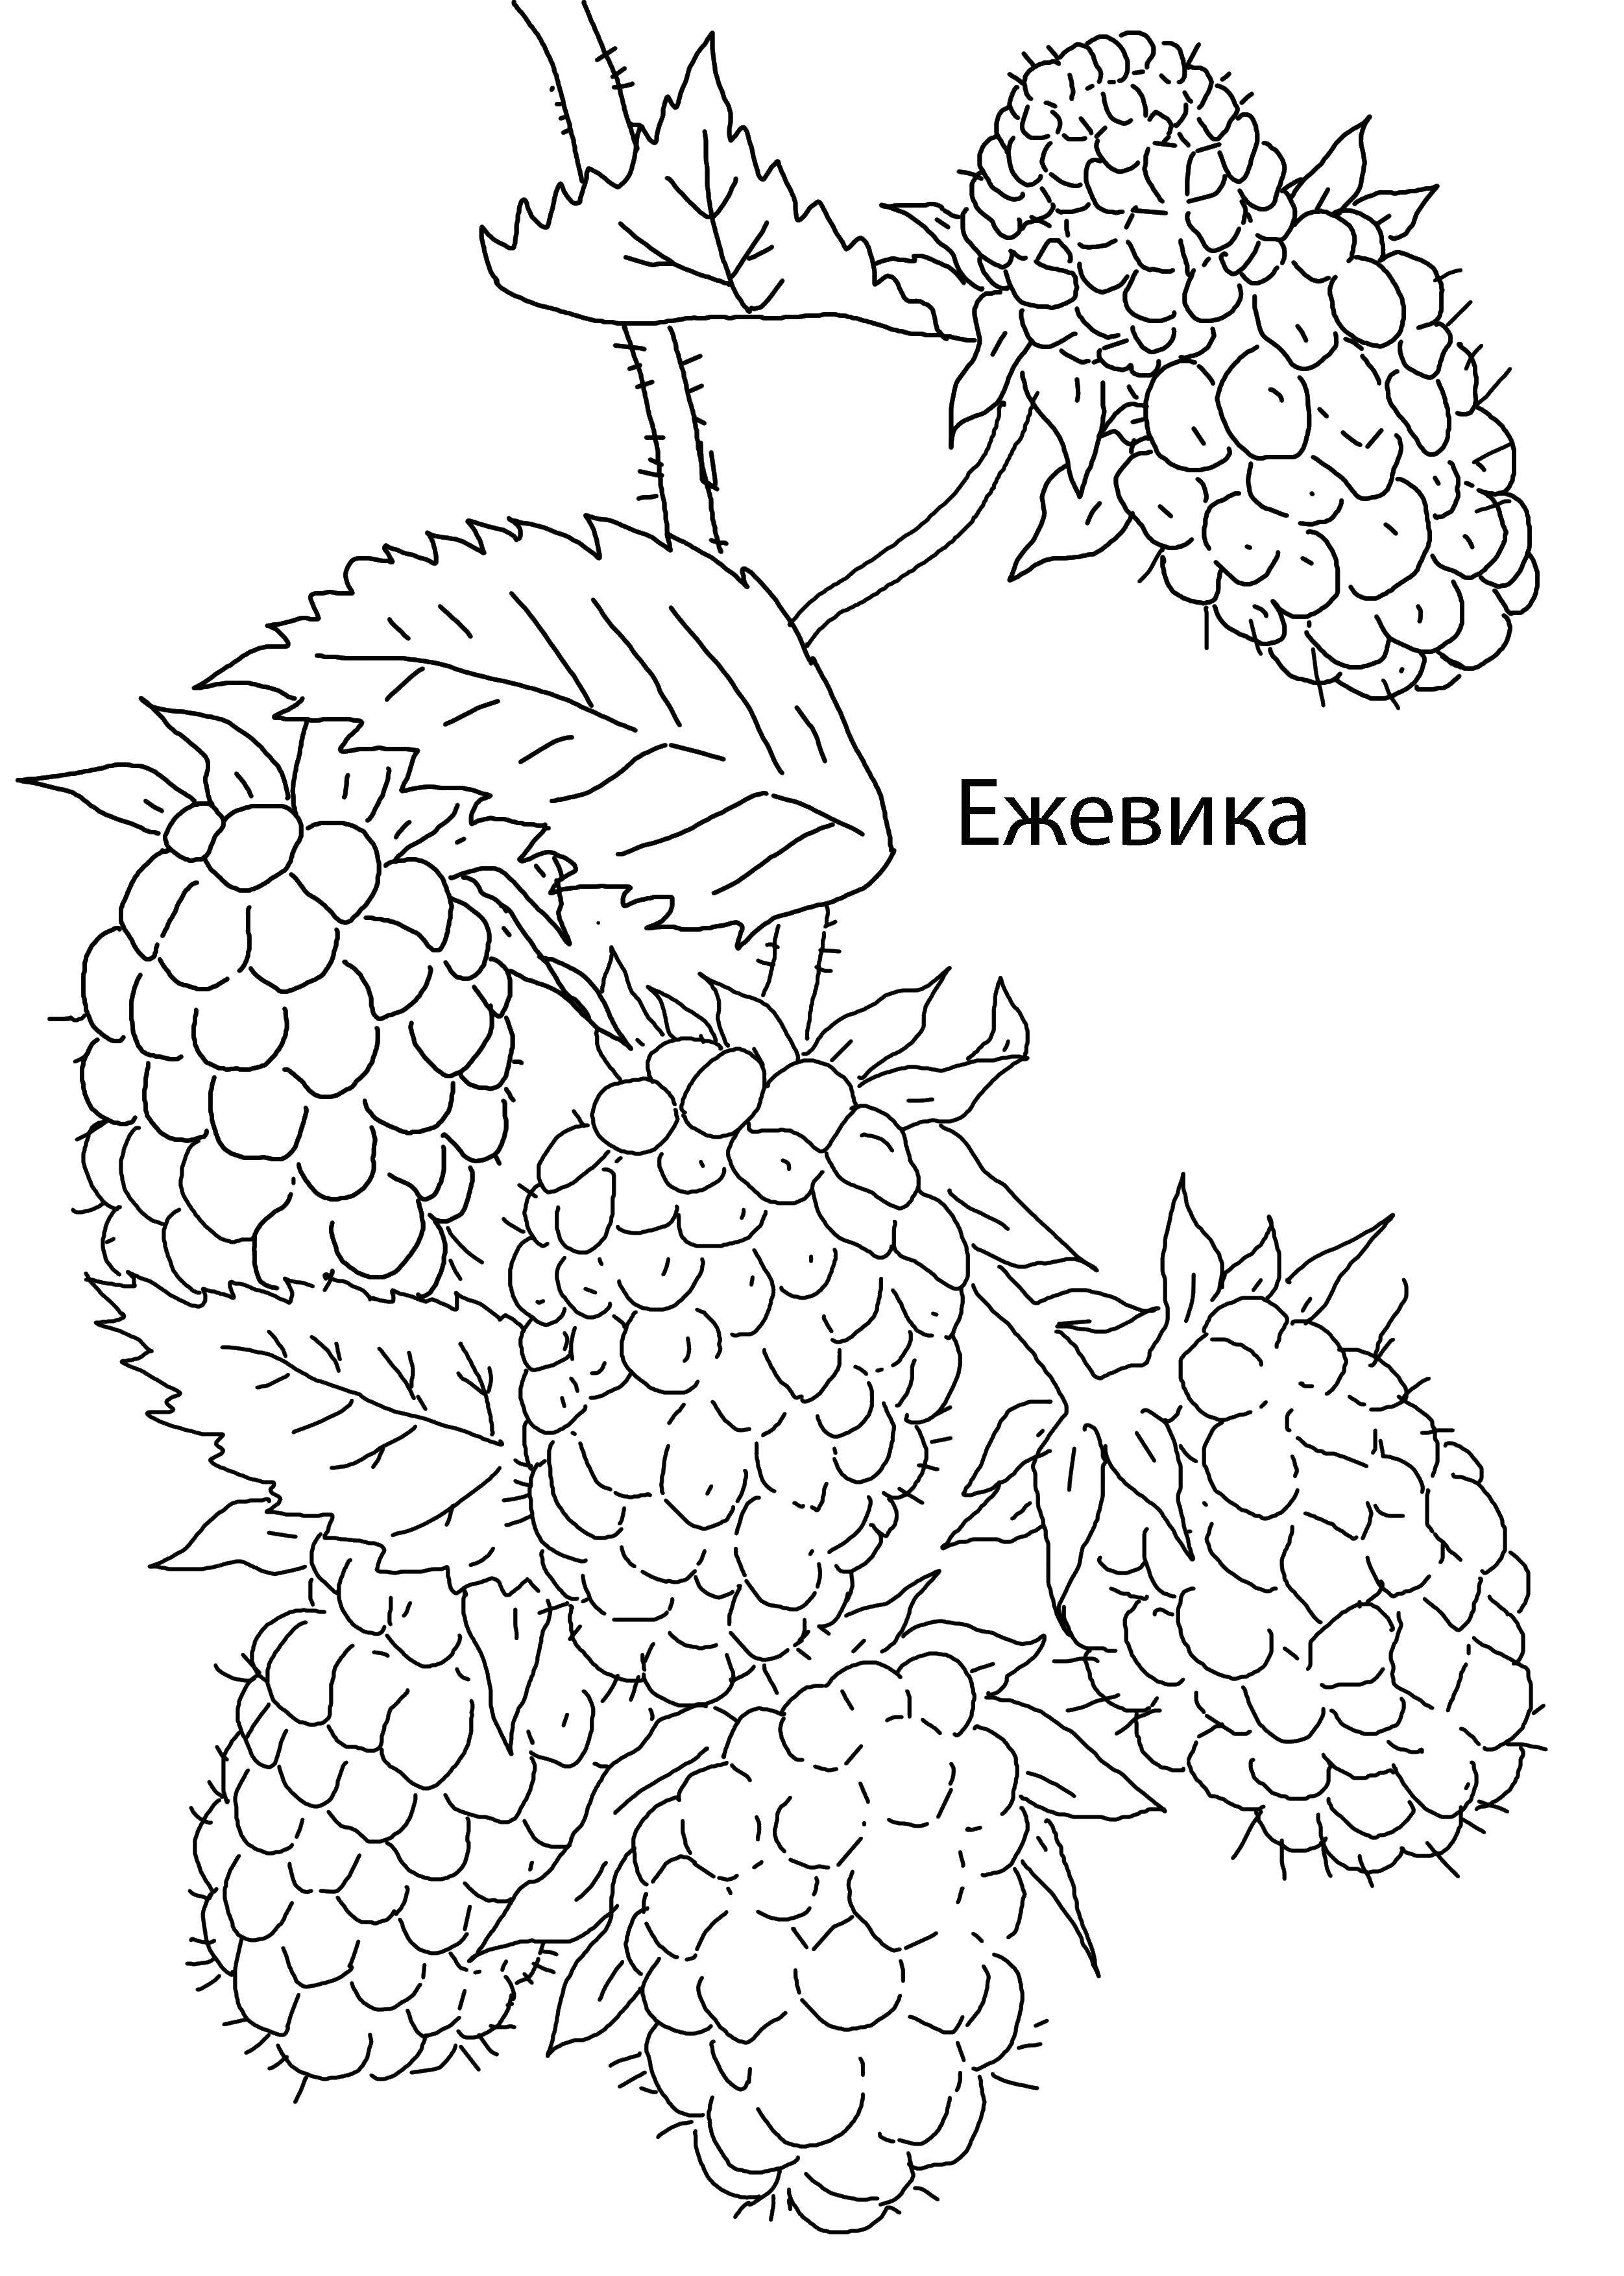 Coloring Ezhevichka. Category berries. Tags:  Berries.